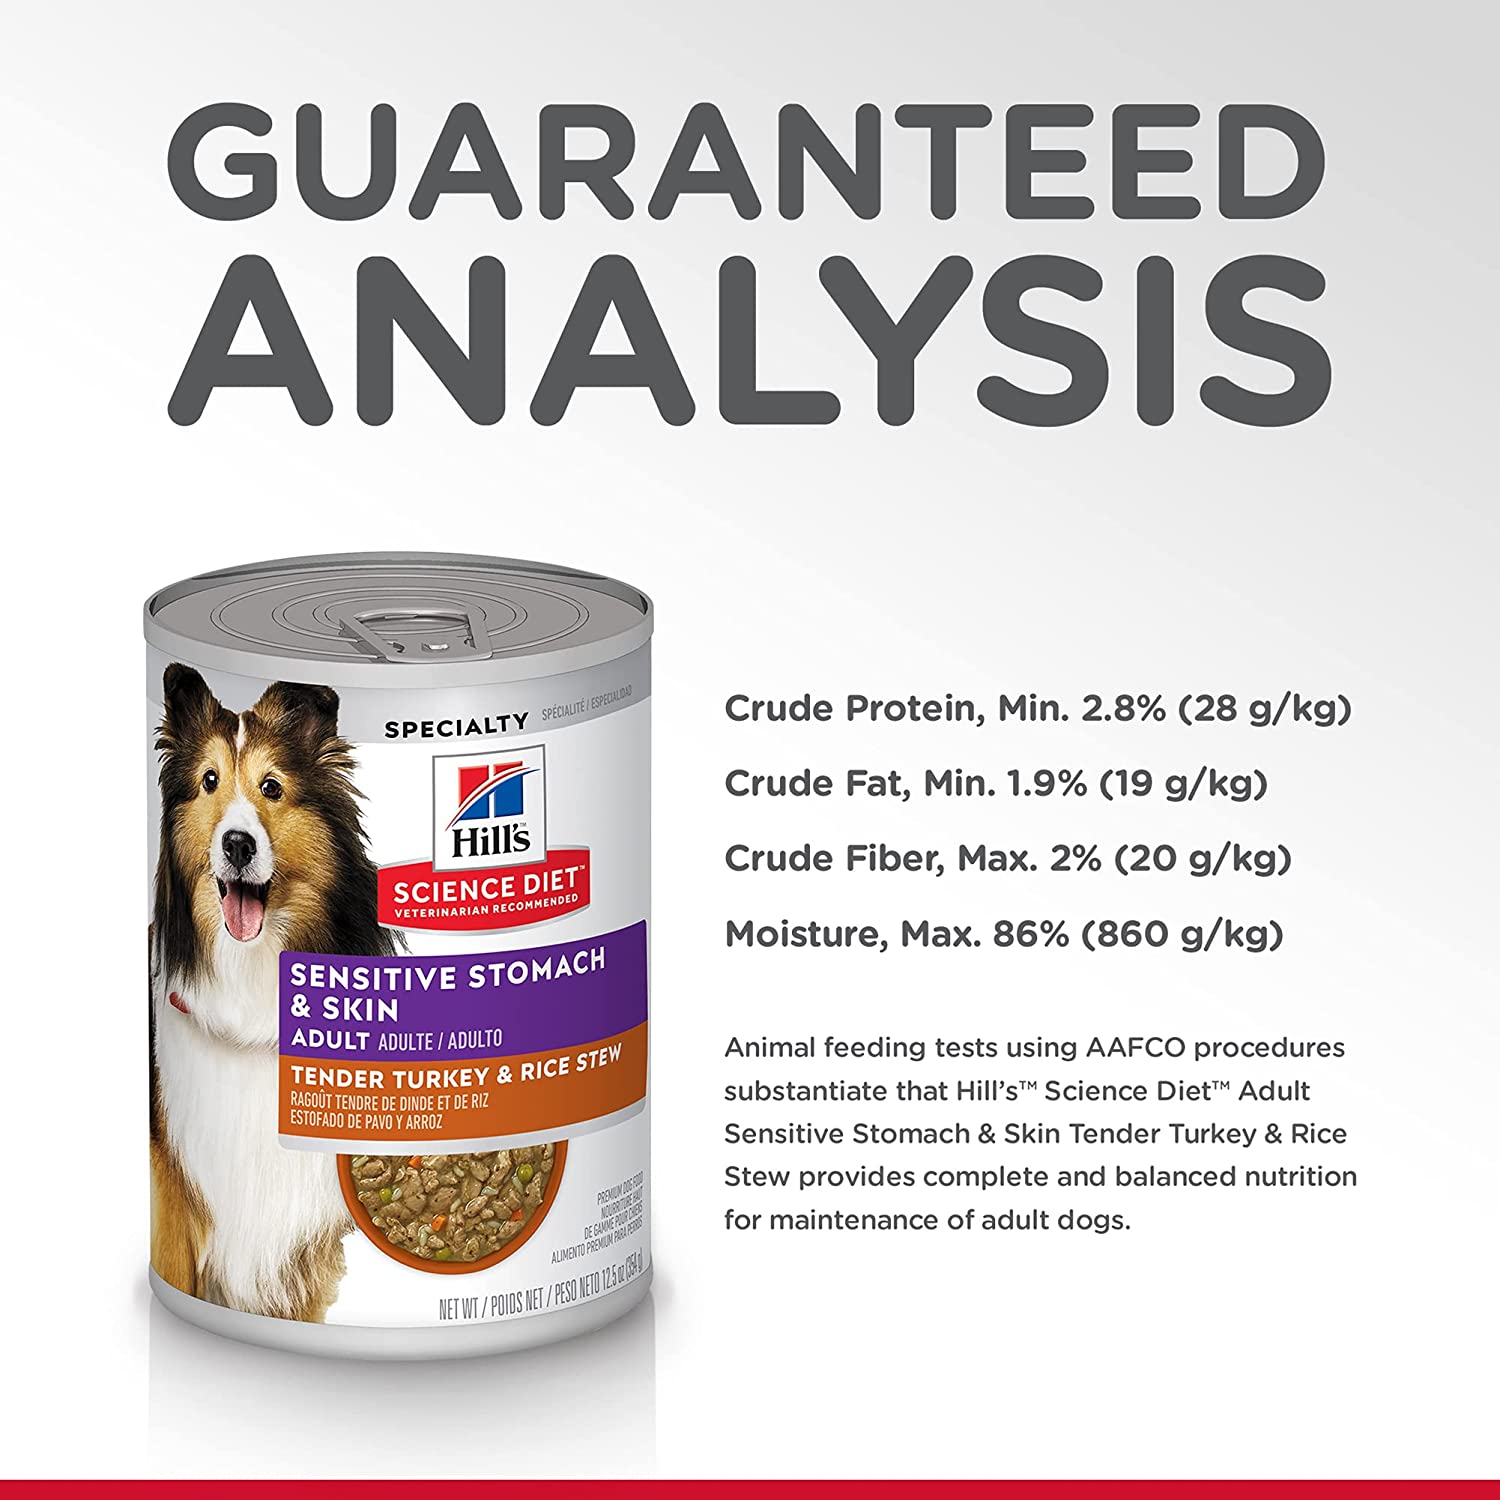 Hill's Science Diet Adult Sensitive Stomach & Skin Tender Turkey & Rice Stew dog food  Canned Dog Food  | PetMax Canada